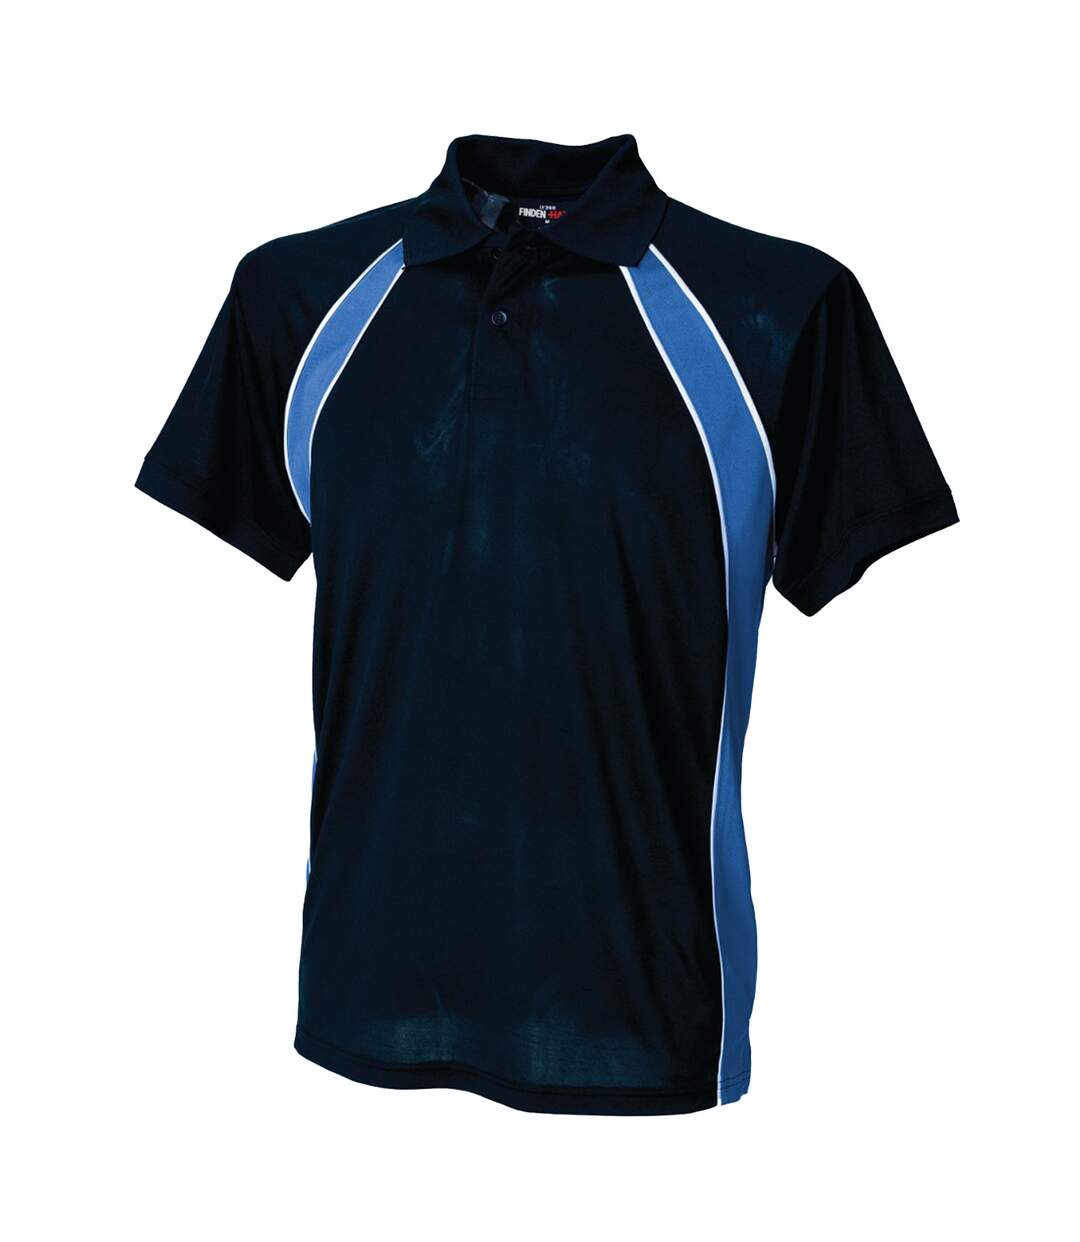 Finden & Hales Mens Jersey Team Sports Polo T-Shirt (Navy/Royal/White) - UTRW425